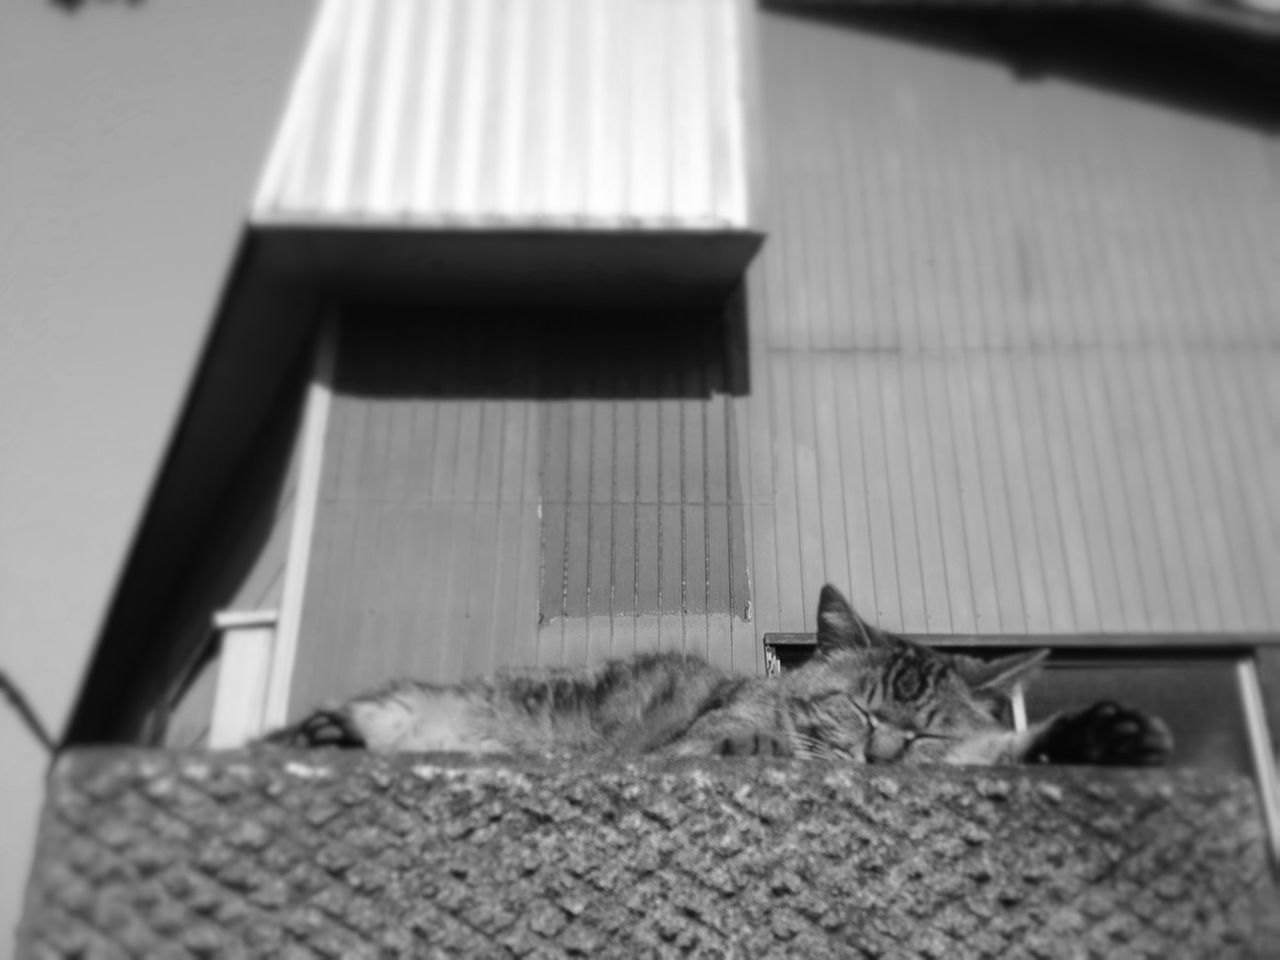 building exterior, built structure, architecture, one animal, domestic cat, animal themes, house, no people, day, wall - building feature, pets, window, selective focus, cat, outdoors, close-up, domestic animals, sunlight, residential structure, wood - material